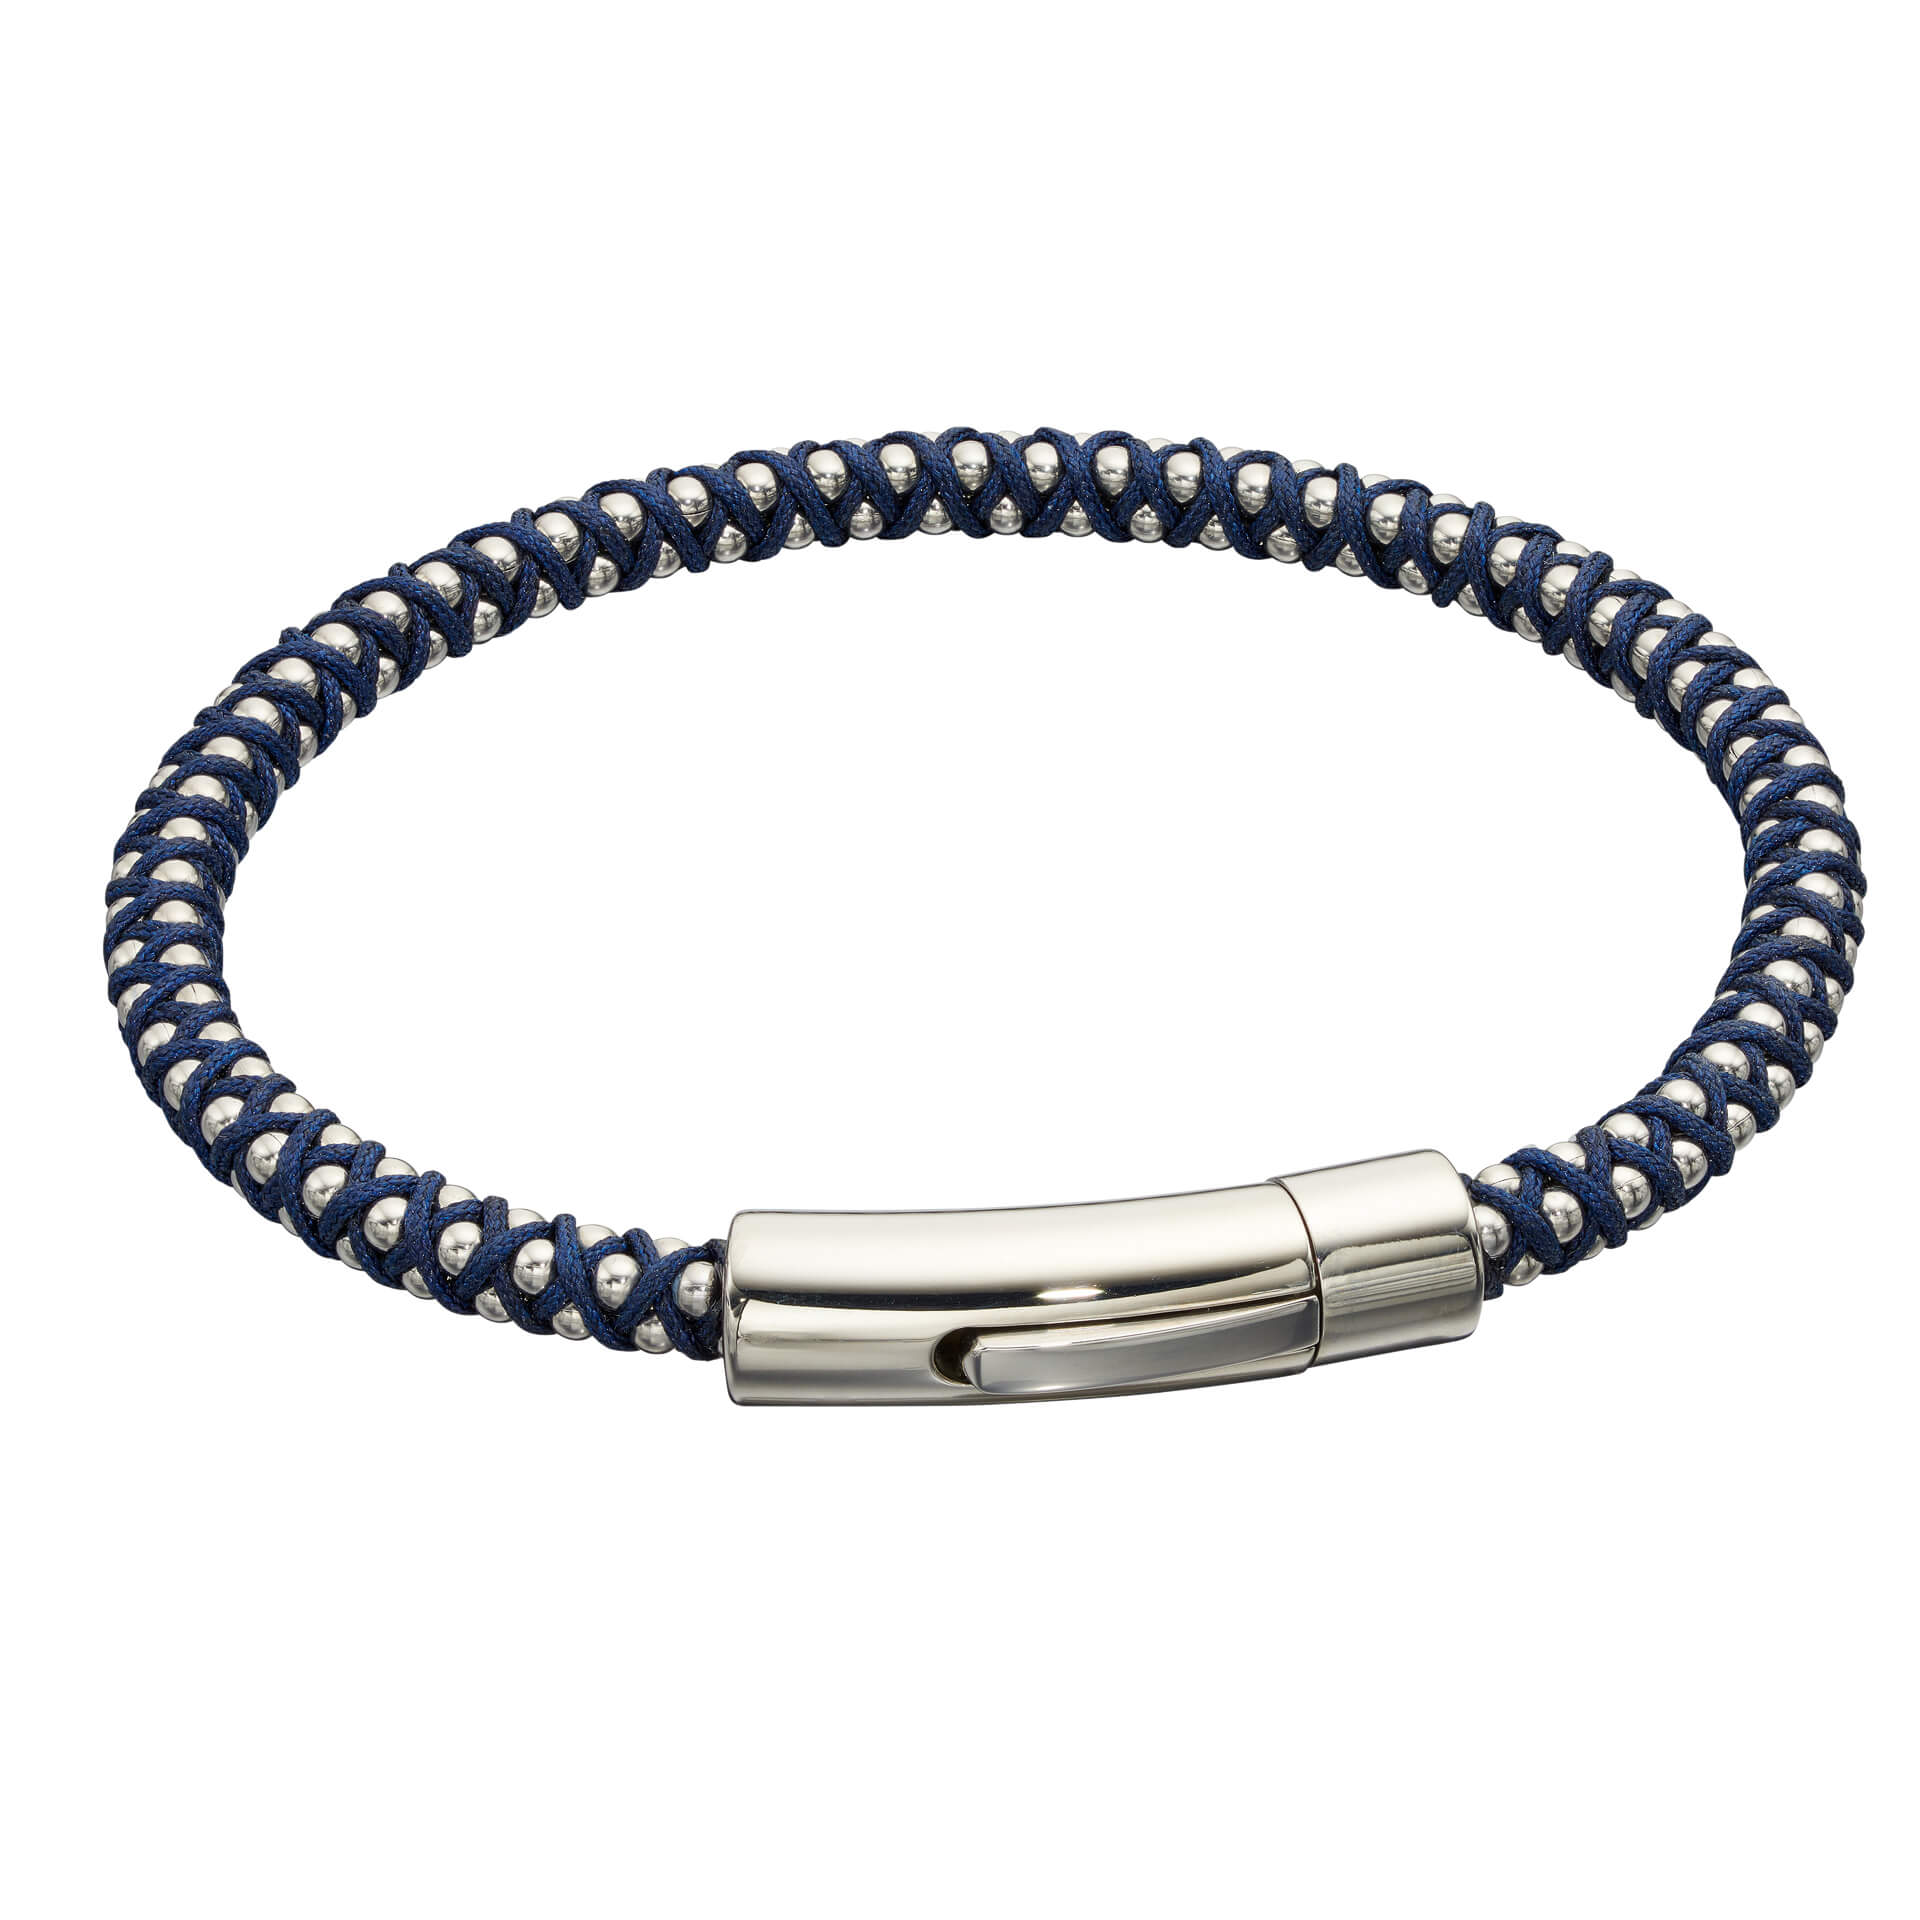 Stainless Steel & Navy Paracord Bead Bracelet - FB0028 - Hallmark Jewellers Formby & The Jewellers Bench Widnes